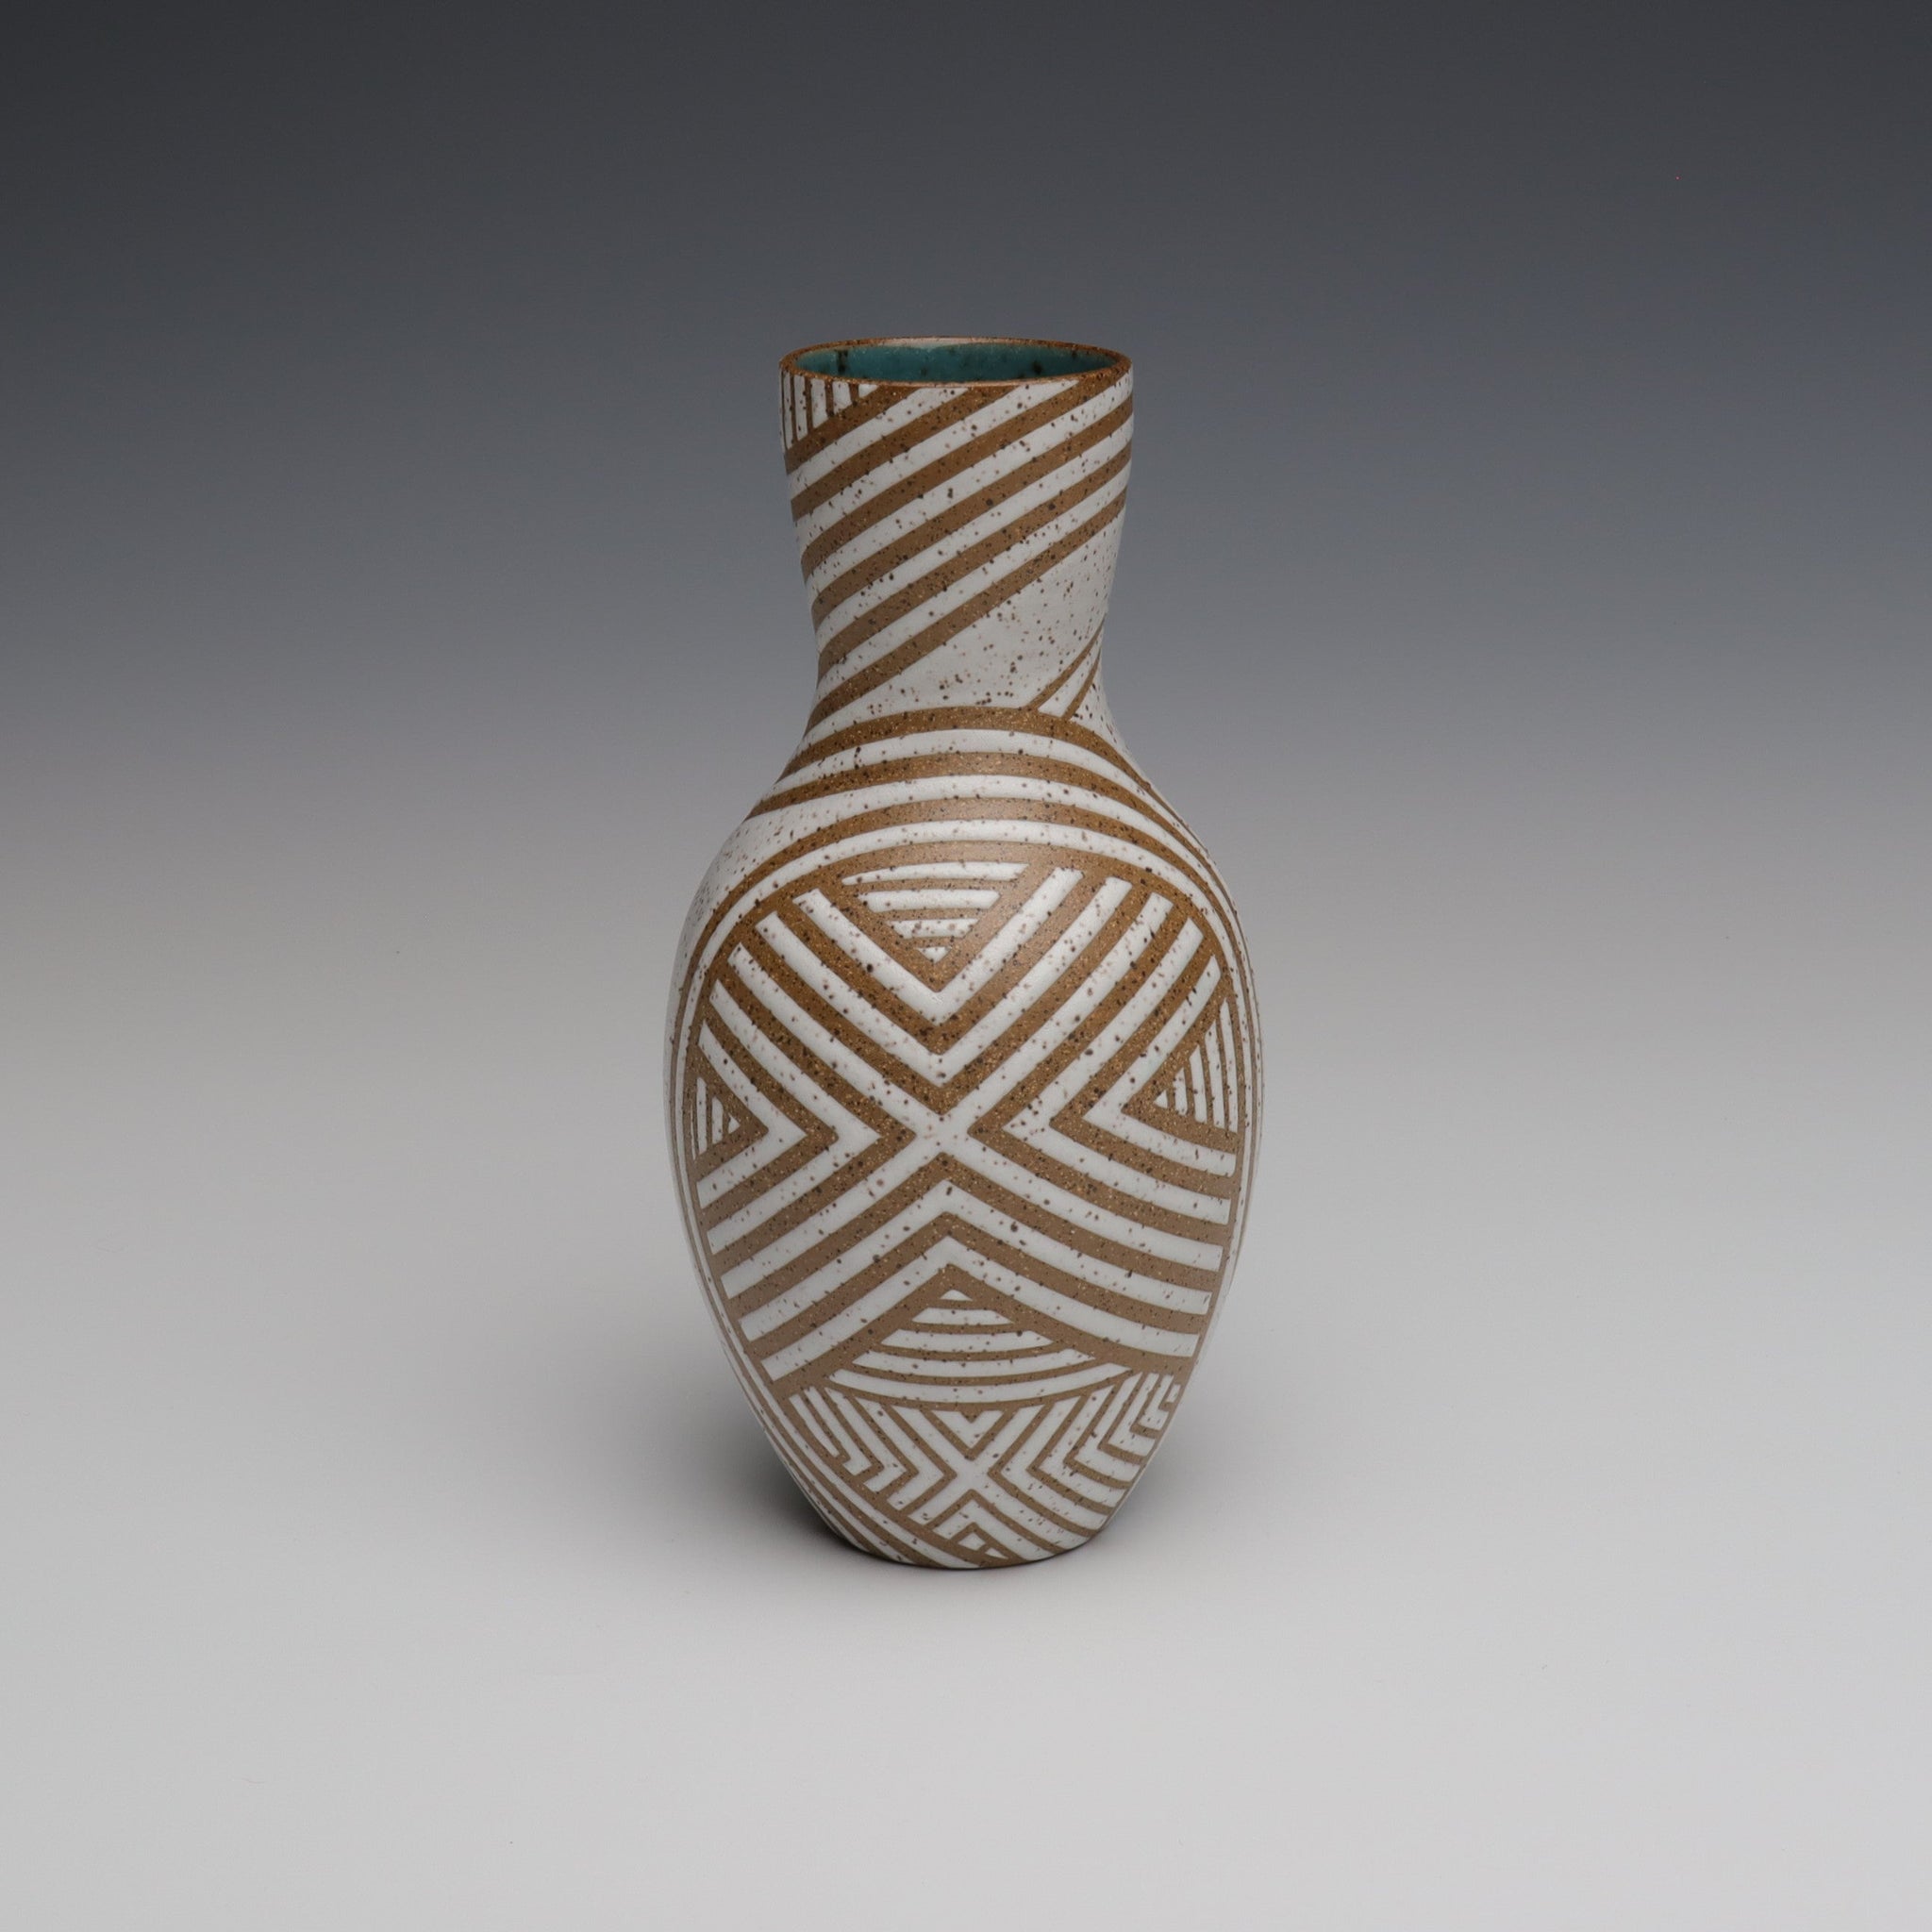 Small Vase - 17.5cm / 6.9in High